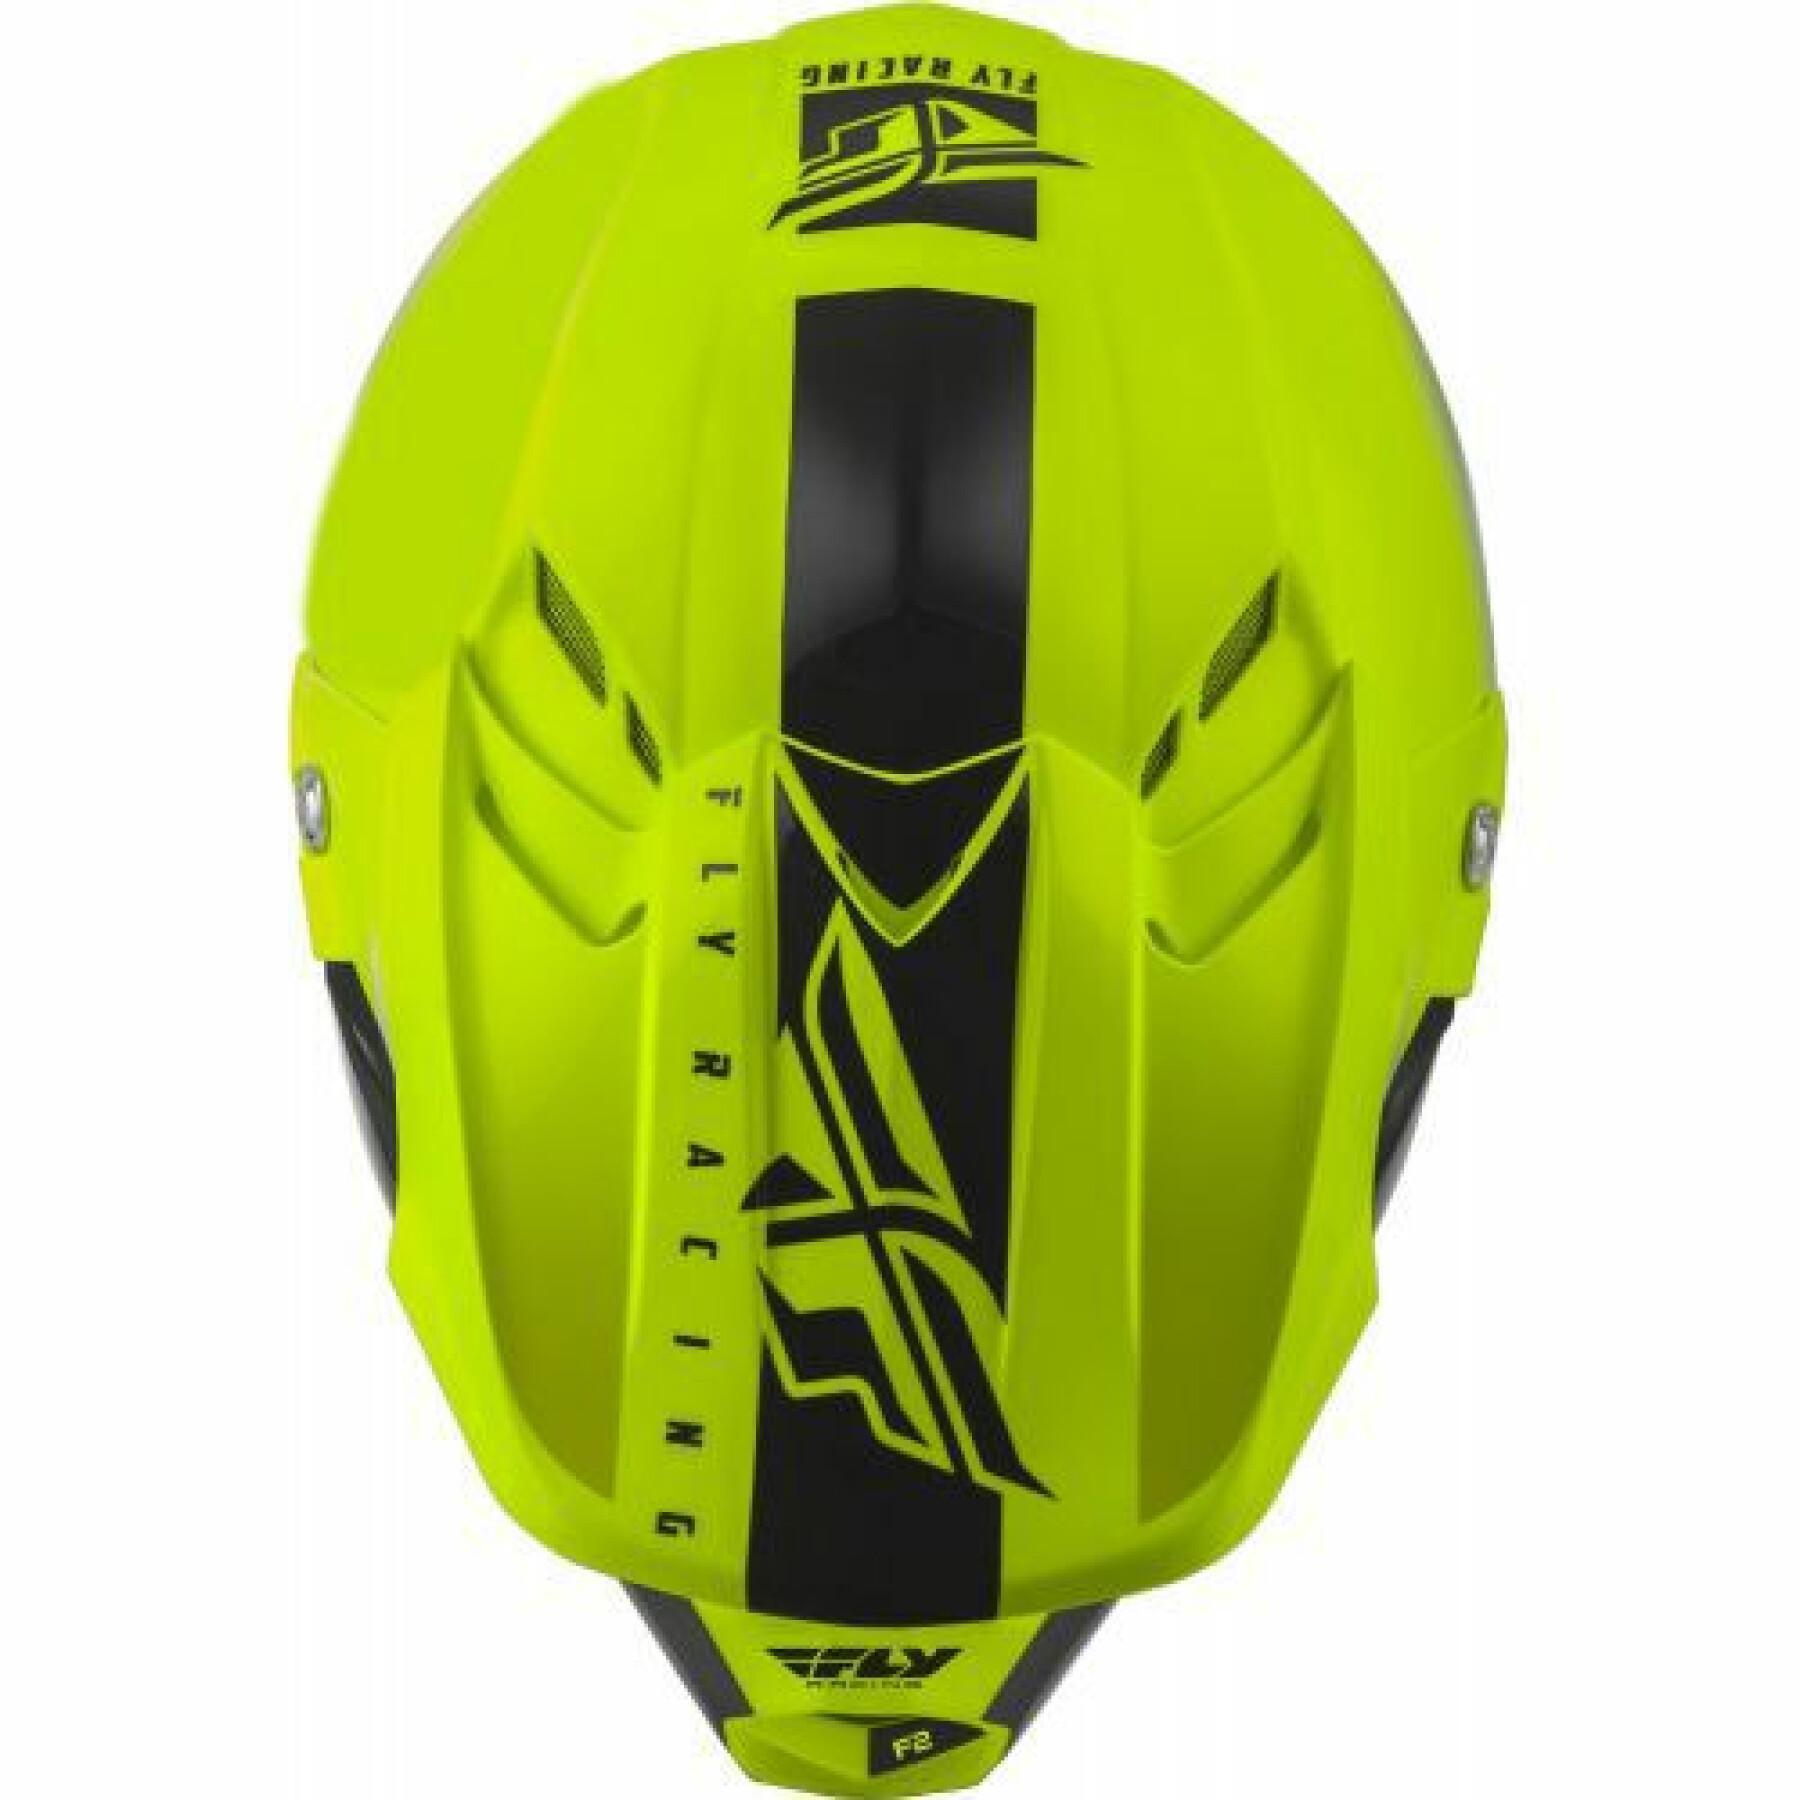 Casque Fly Racing F2 Mips Shield 2020